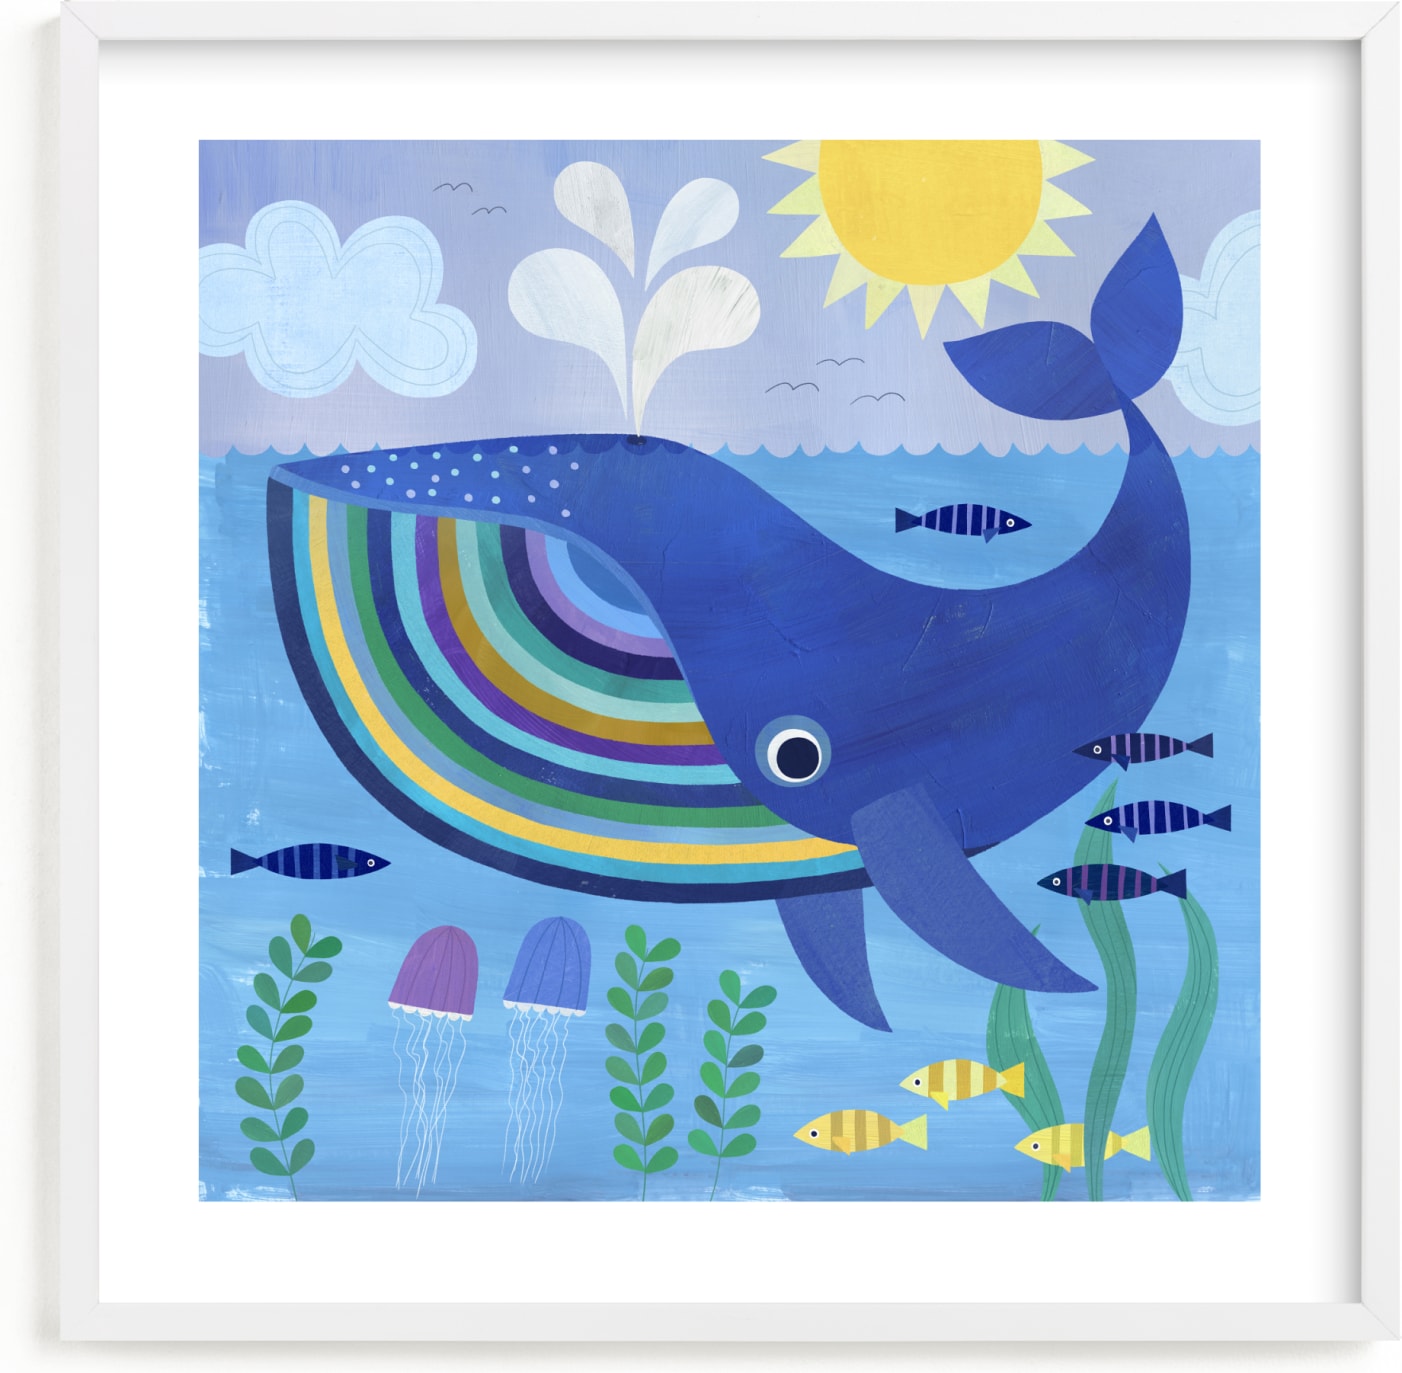 This is a blue kids wall art by melanie mikecz called Little Blue Whale.